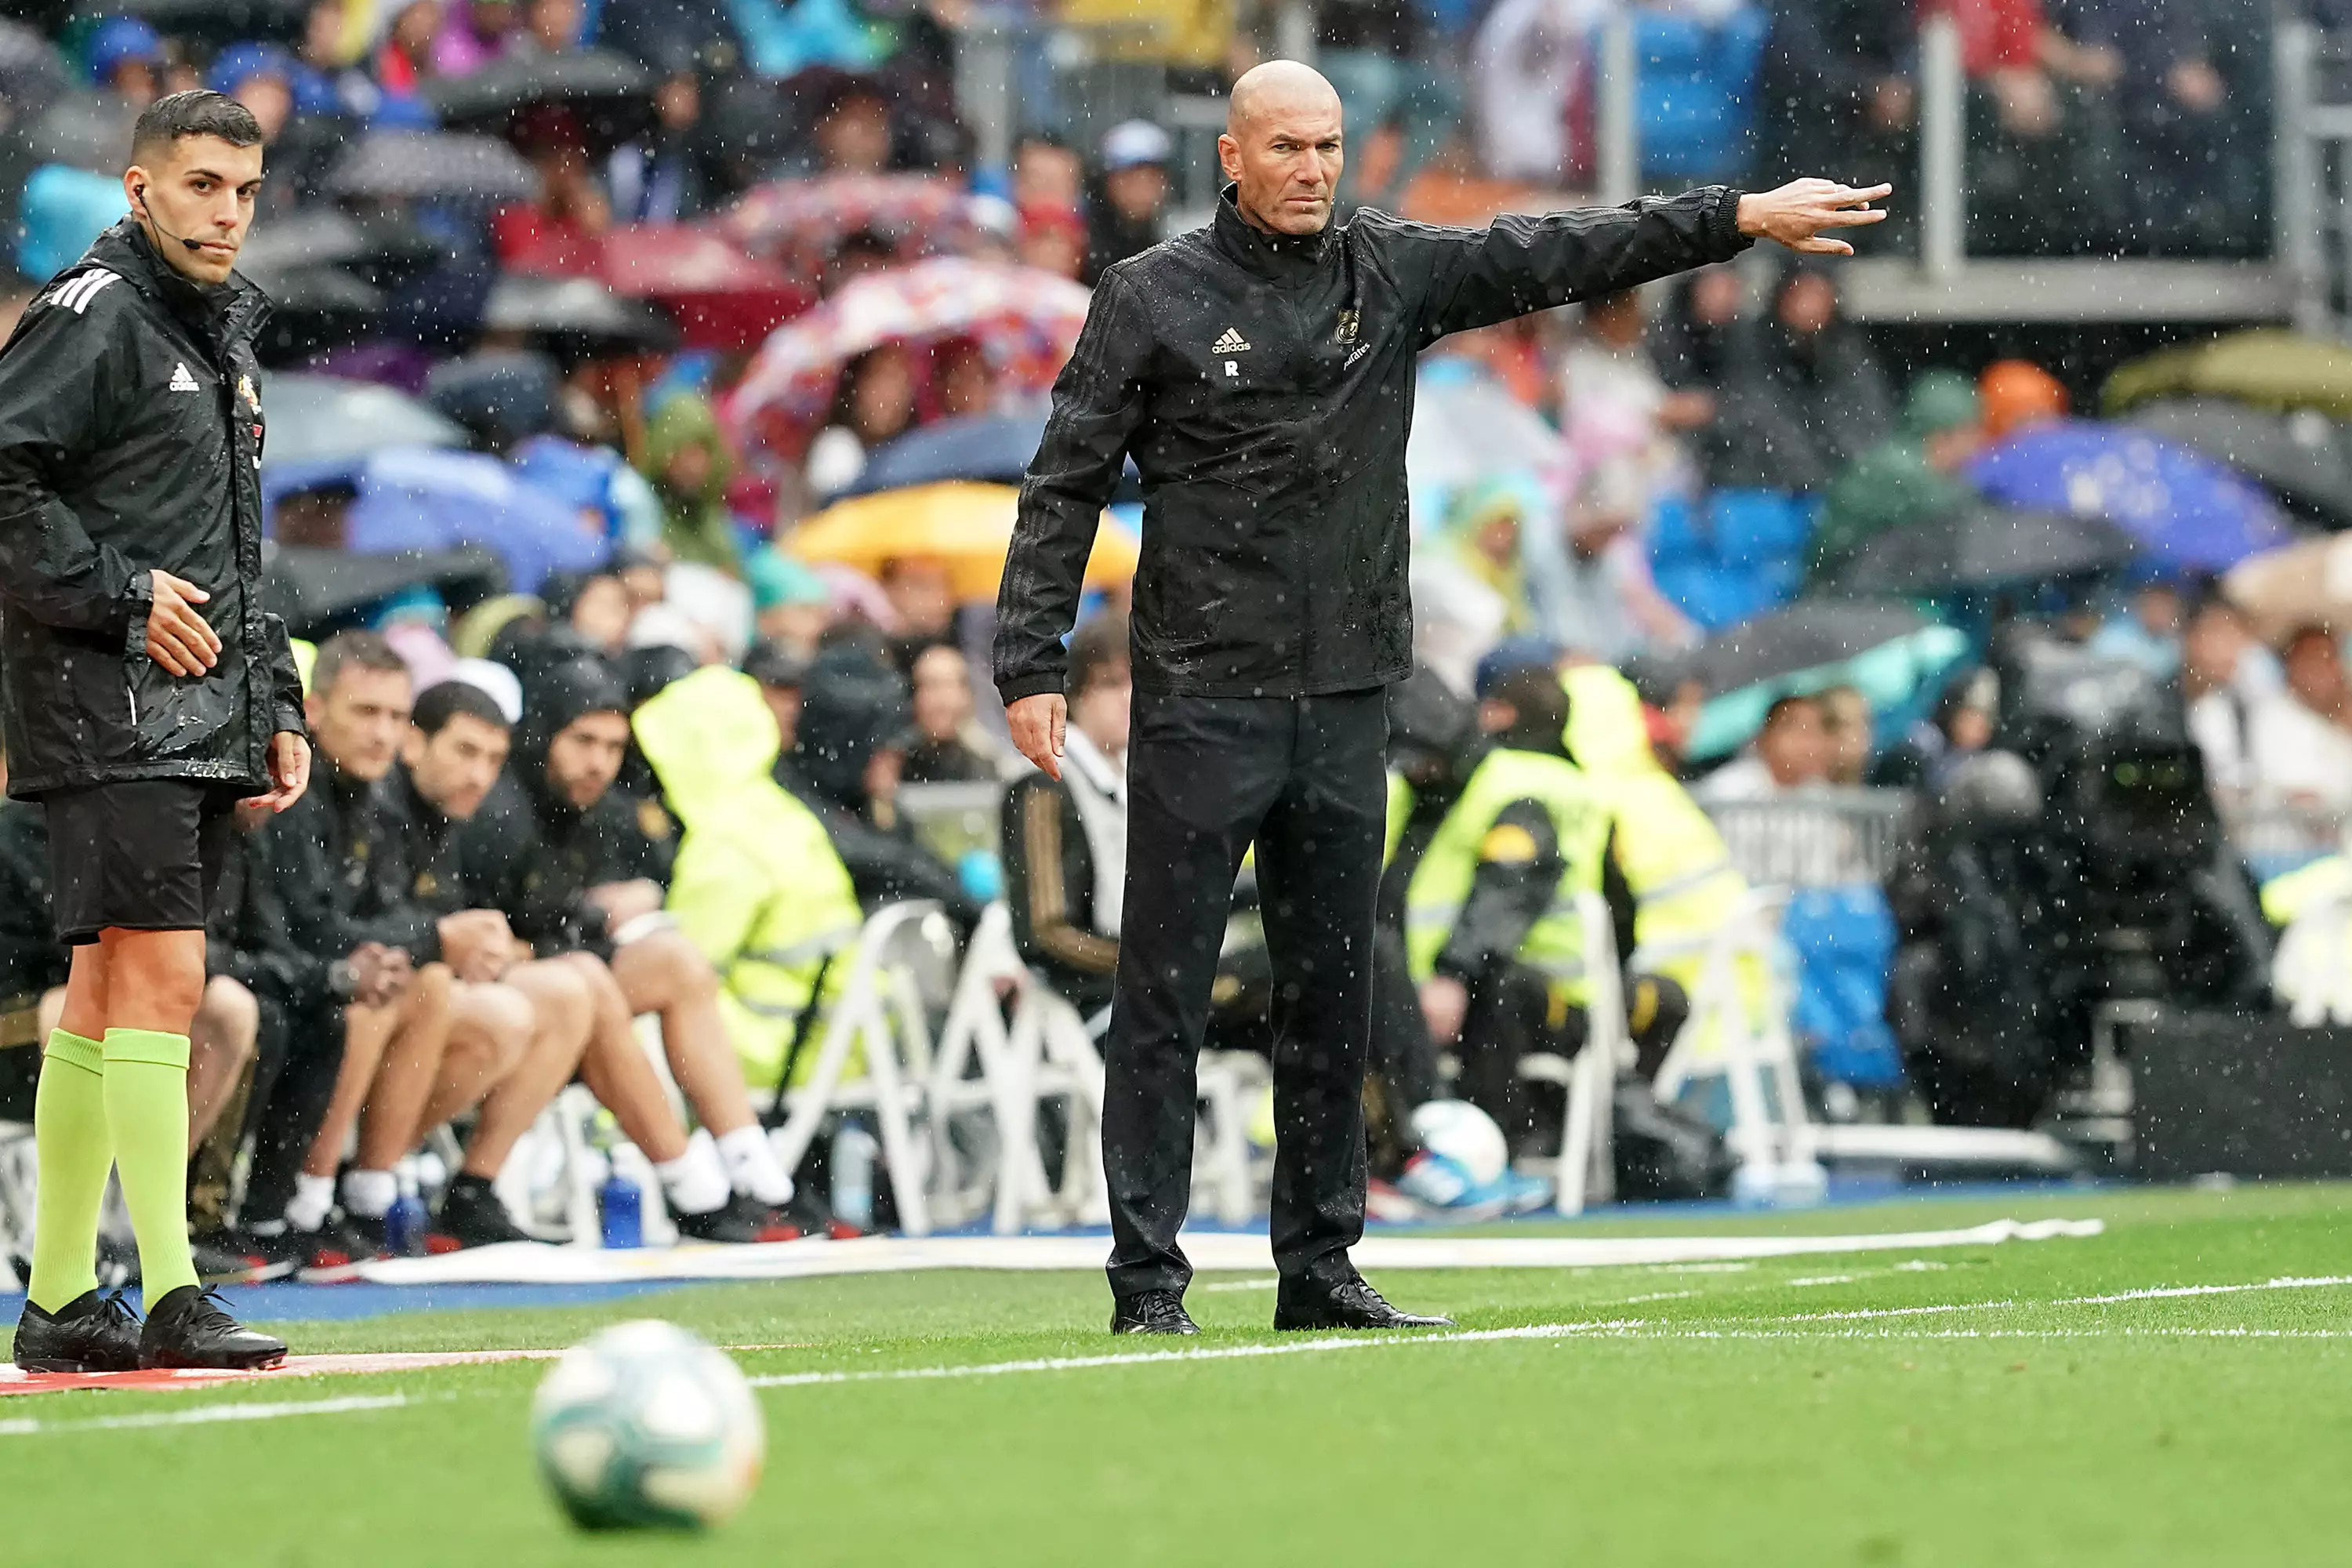 Zidane is already under some pressure at the Bernabeu. Image: PA Images